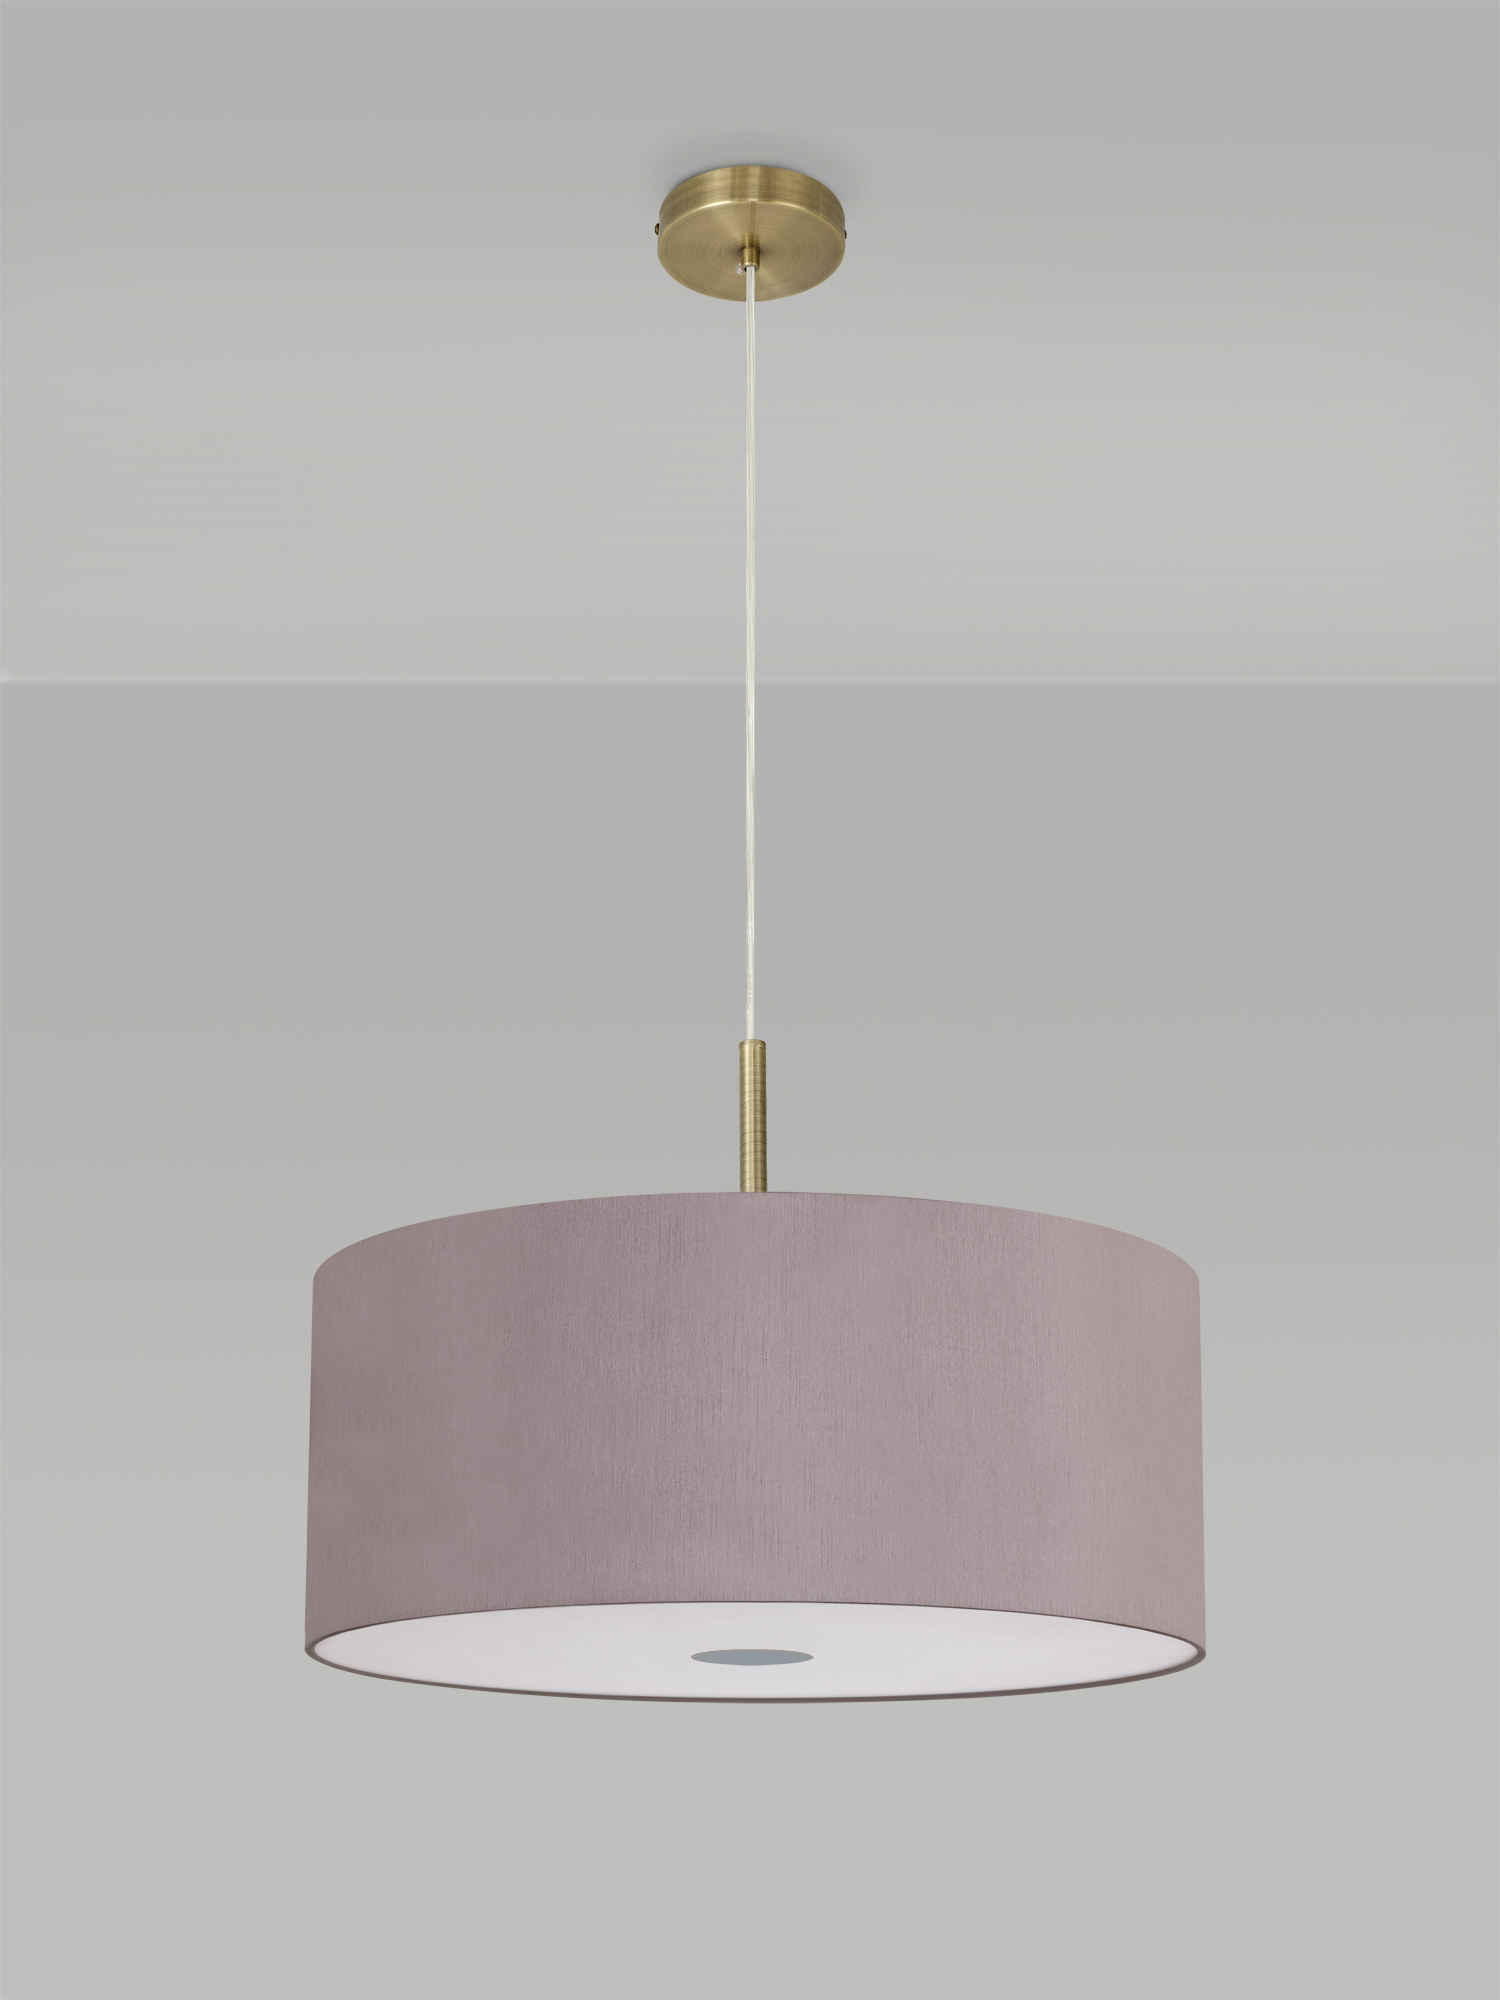 Baymont 60cm 5 Light Pendant Antique Brass; Taupe/Halo Gold; Frosted Diffuser DK0519  Deco Baymont AB TA